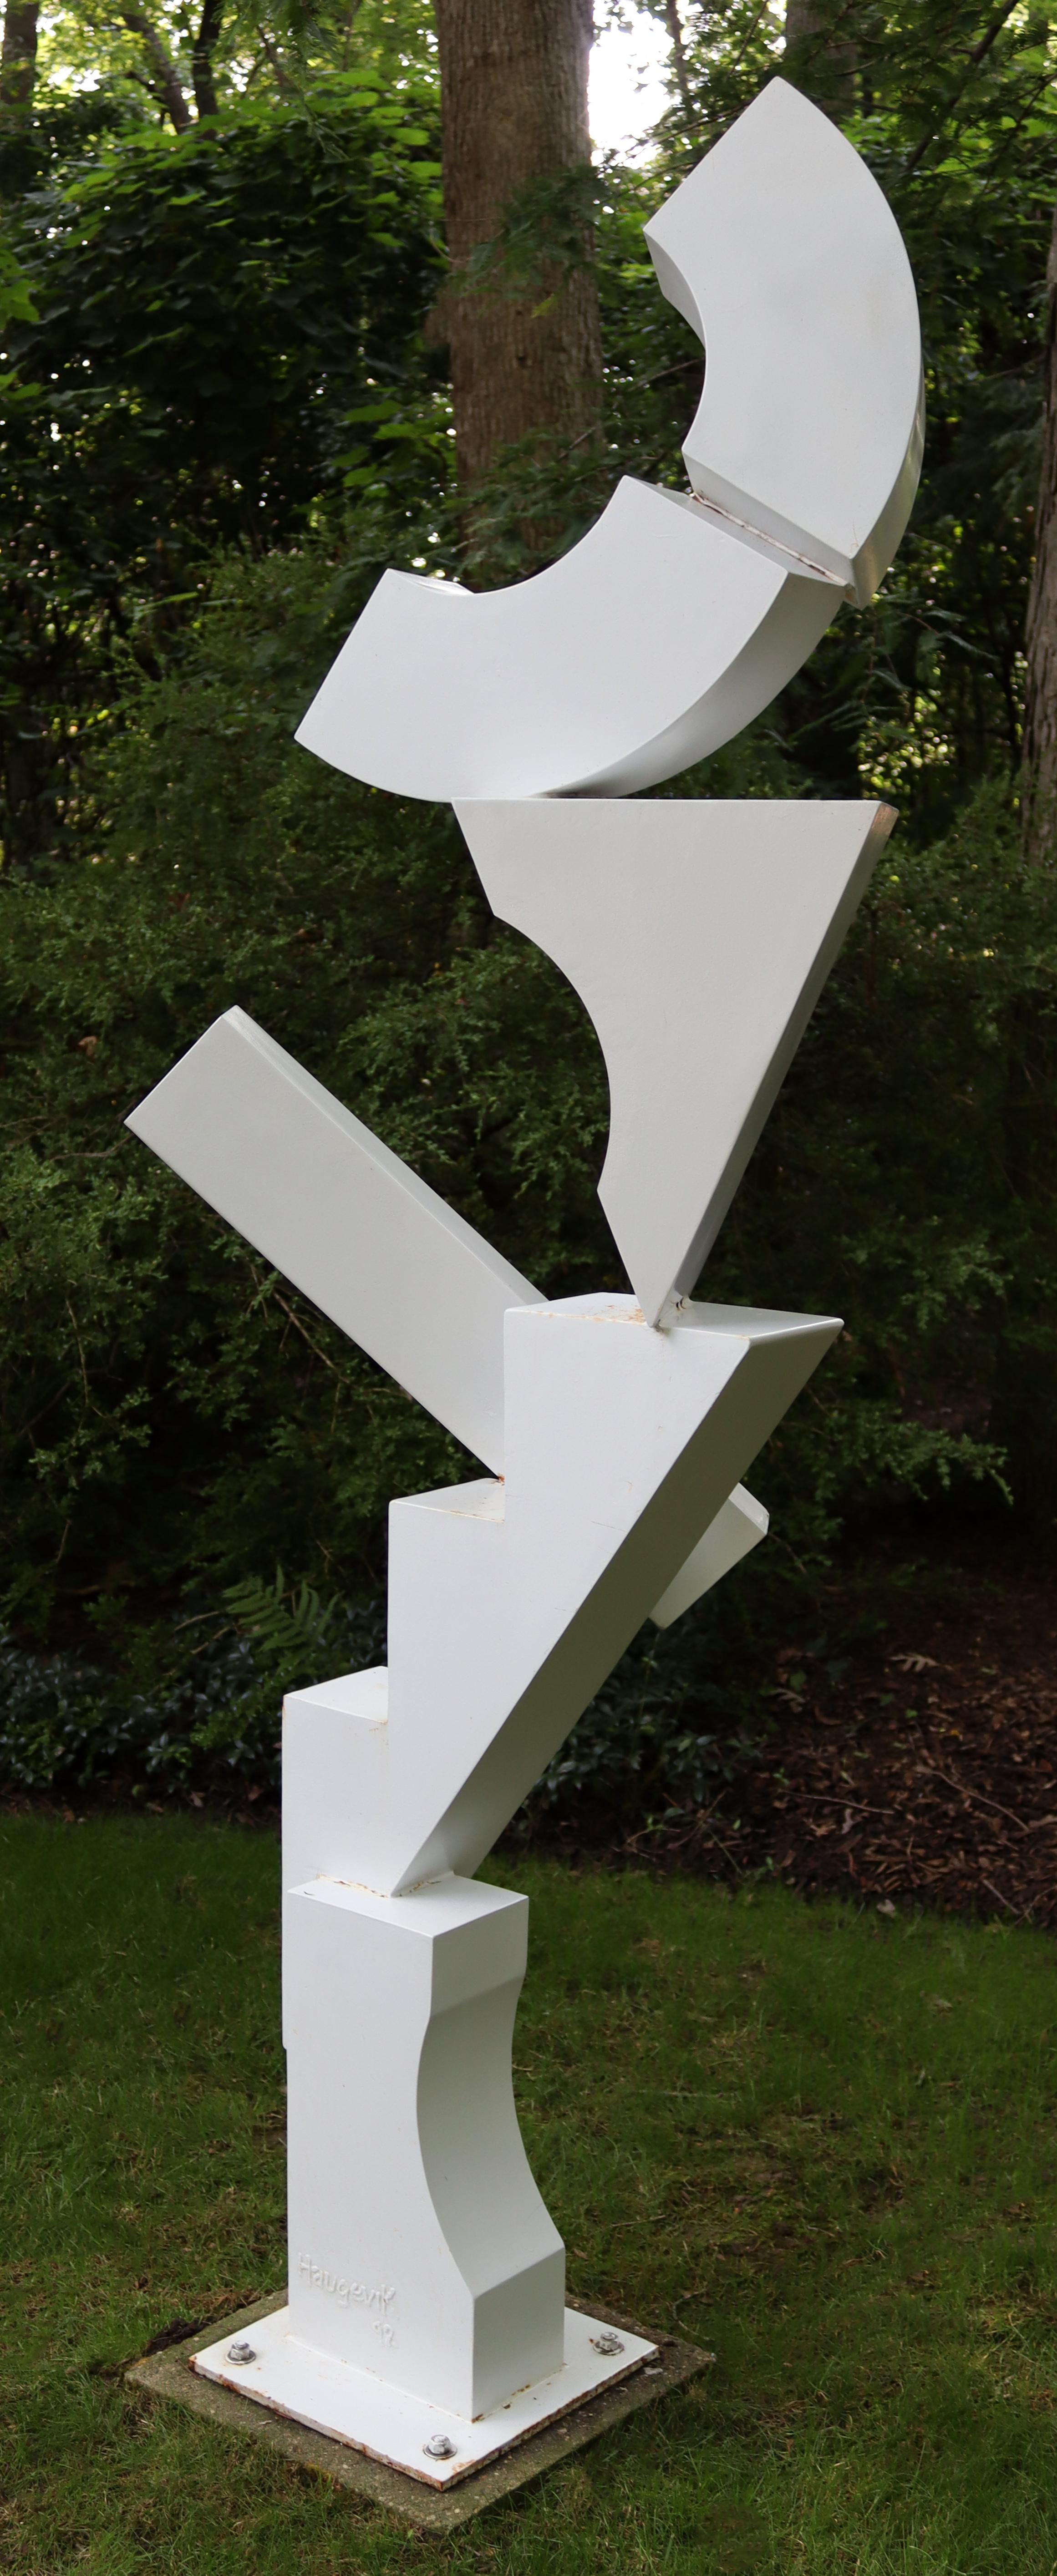 For your consideration is a gorgeous, forged, white painted metal, abstract, indoor or outdoor floor sculpture, signed Ed Haugevik, dated 1992. In excellent condition, with a patina to match its age. The dimensions are 29